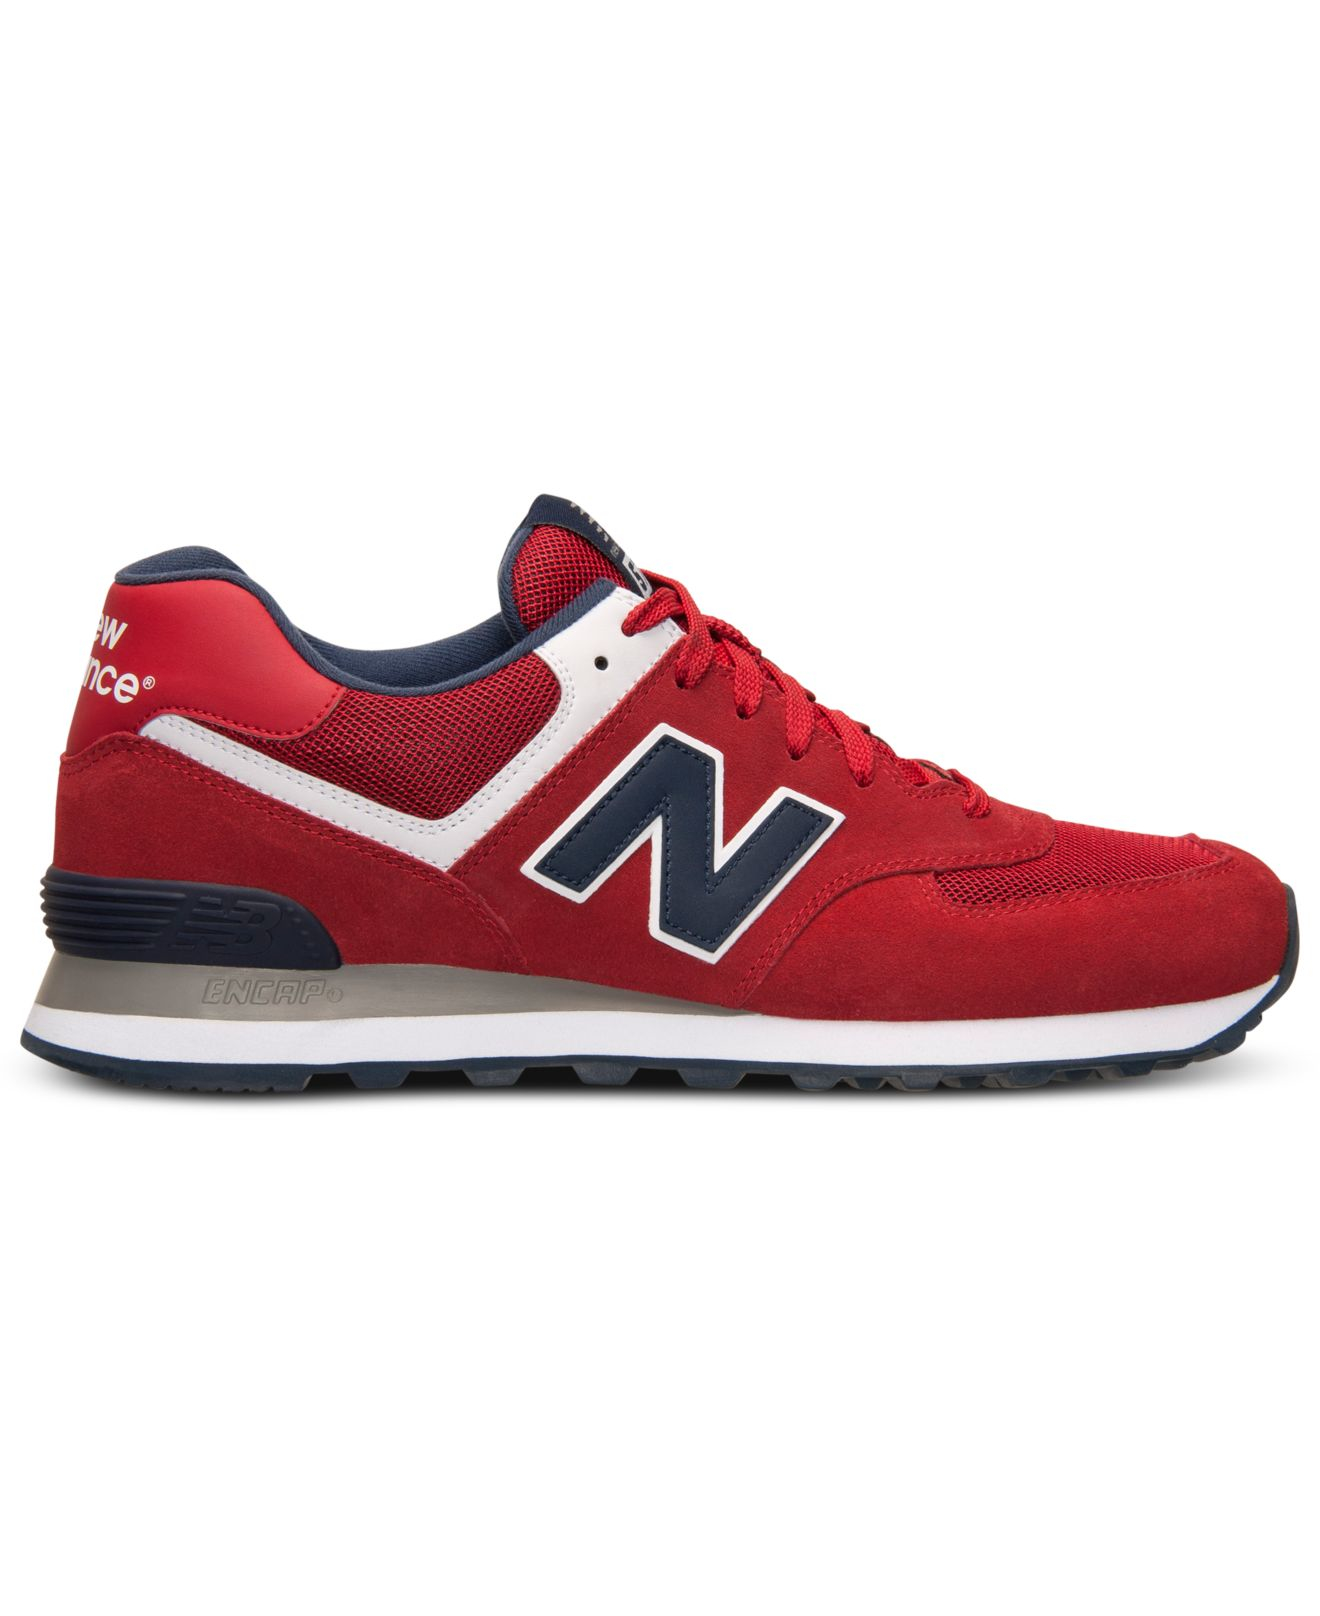 Lyst - New Balance Men'S 574 Casual Sneakers From Finish Line in Red ...